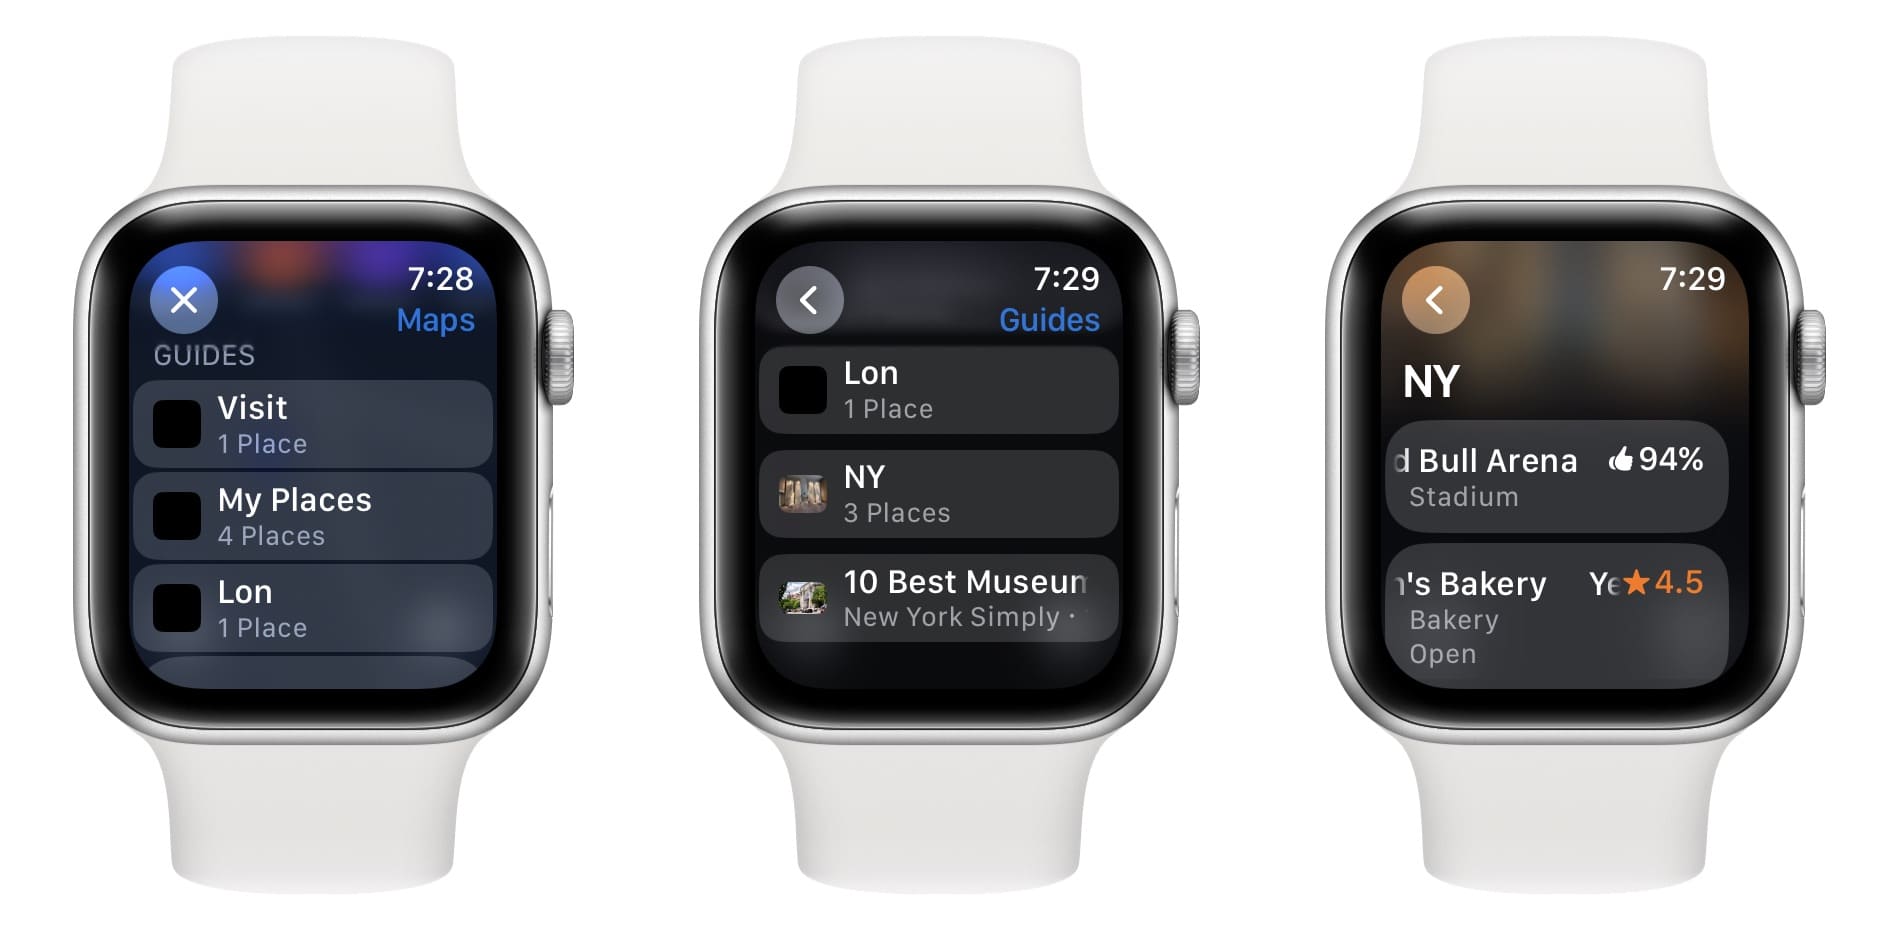 View saved Guides in Maps on Apple Watch